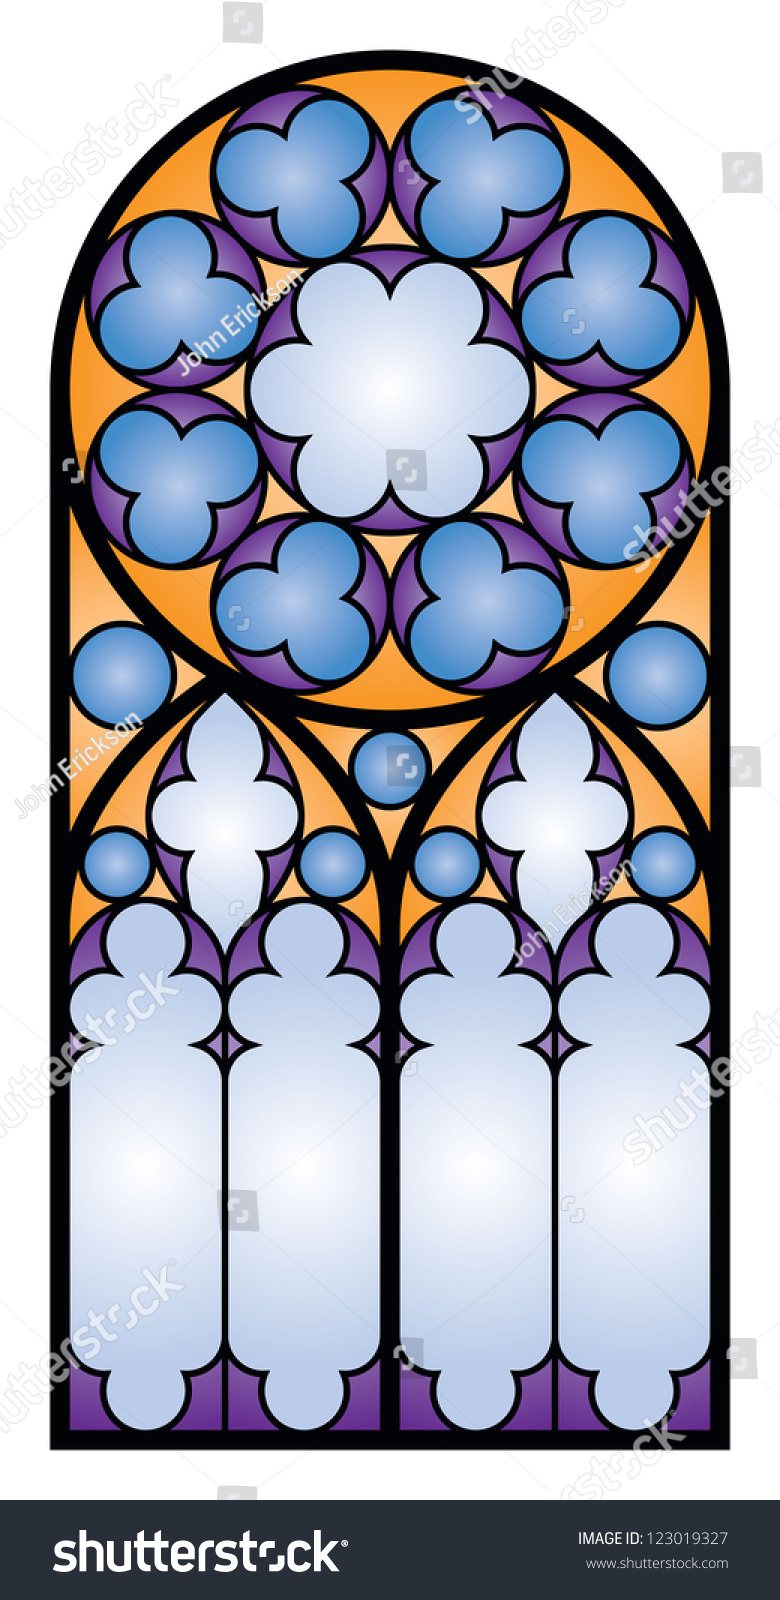 stained glass clipart - photo #42